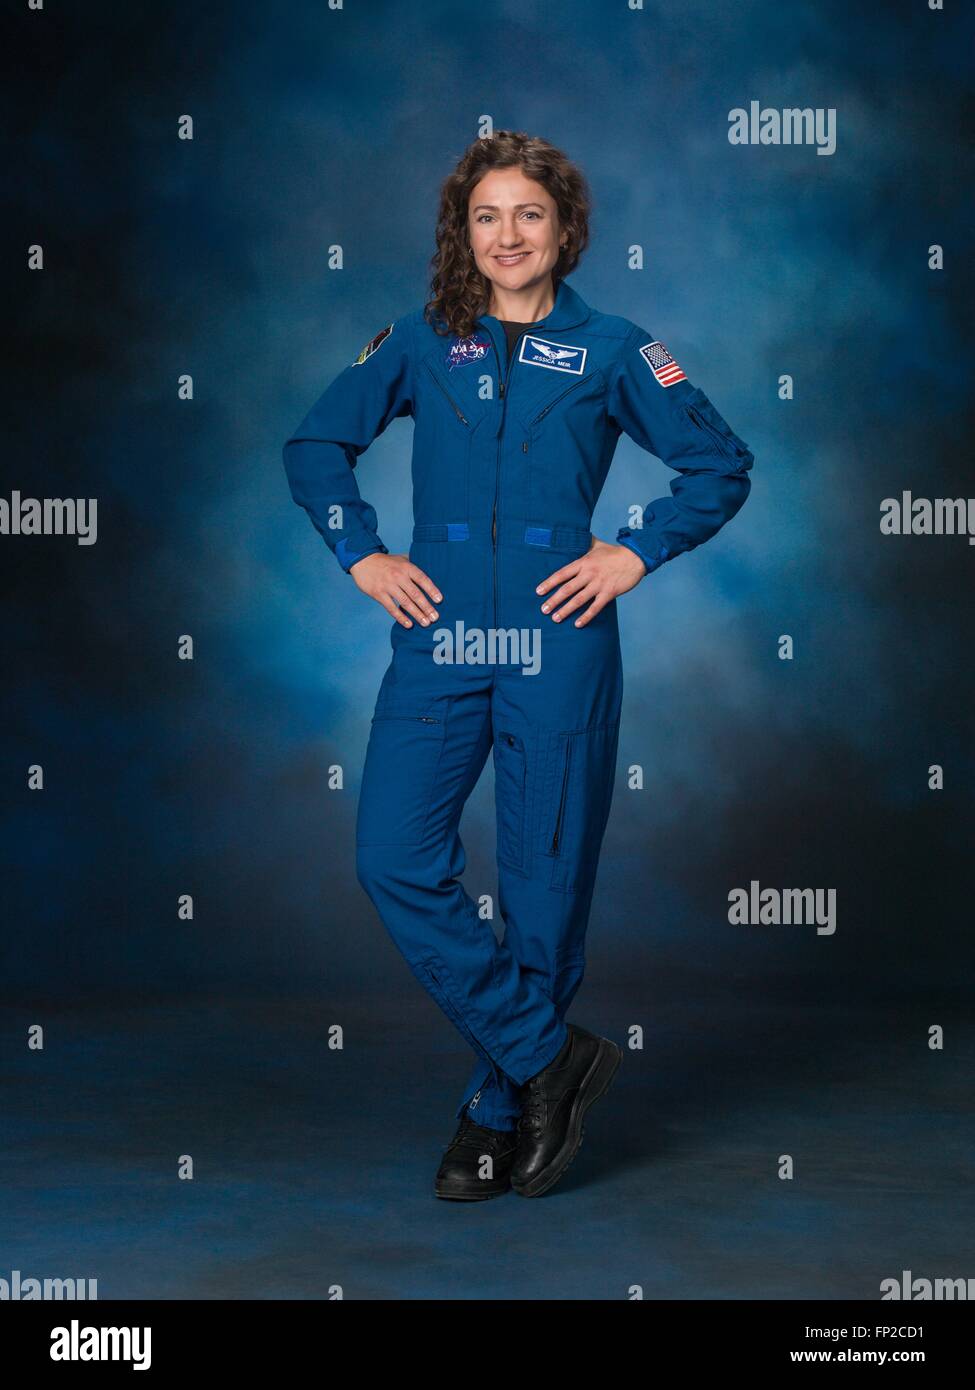 American astronaut Jessica Meir official portrait wearing blue flight suit at the Johnson Space Center February 24, 2016 in Houston, Texas. Stock Photo